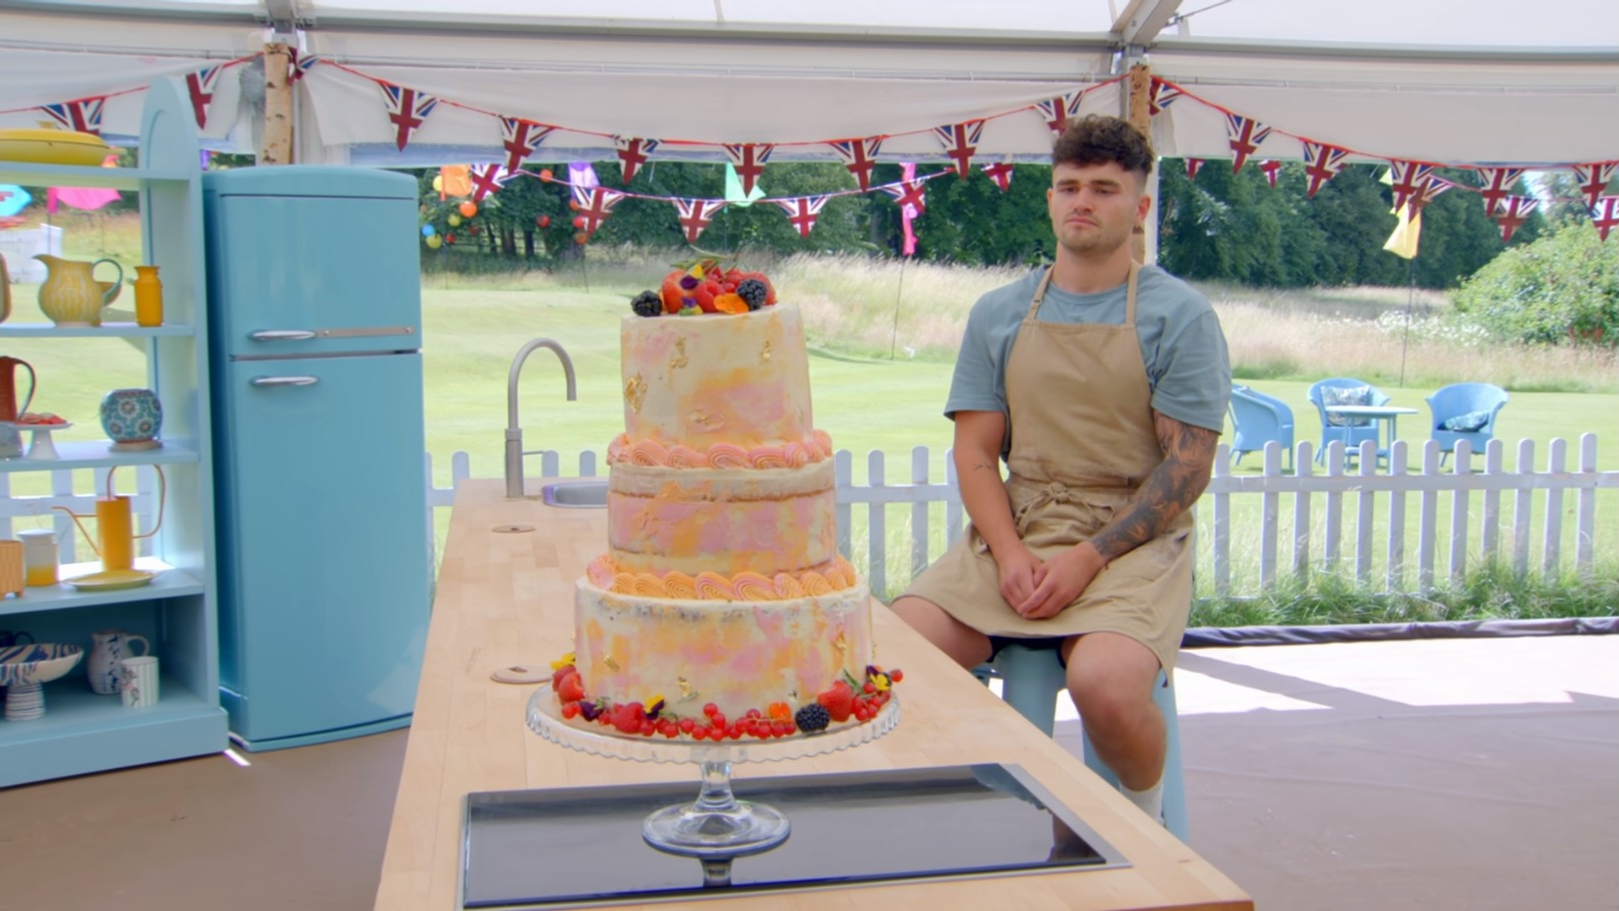 Matty with his Final Celebration Showstopper Cake from 'The Great British Baking Show' Season 14's Grand Final 